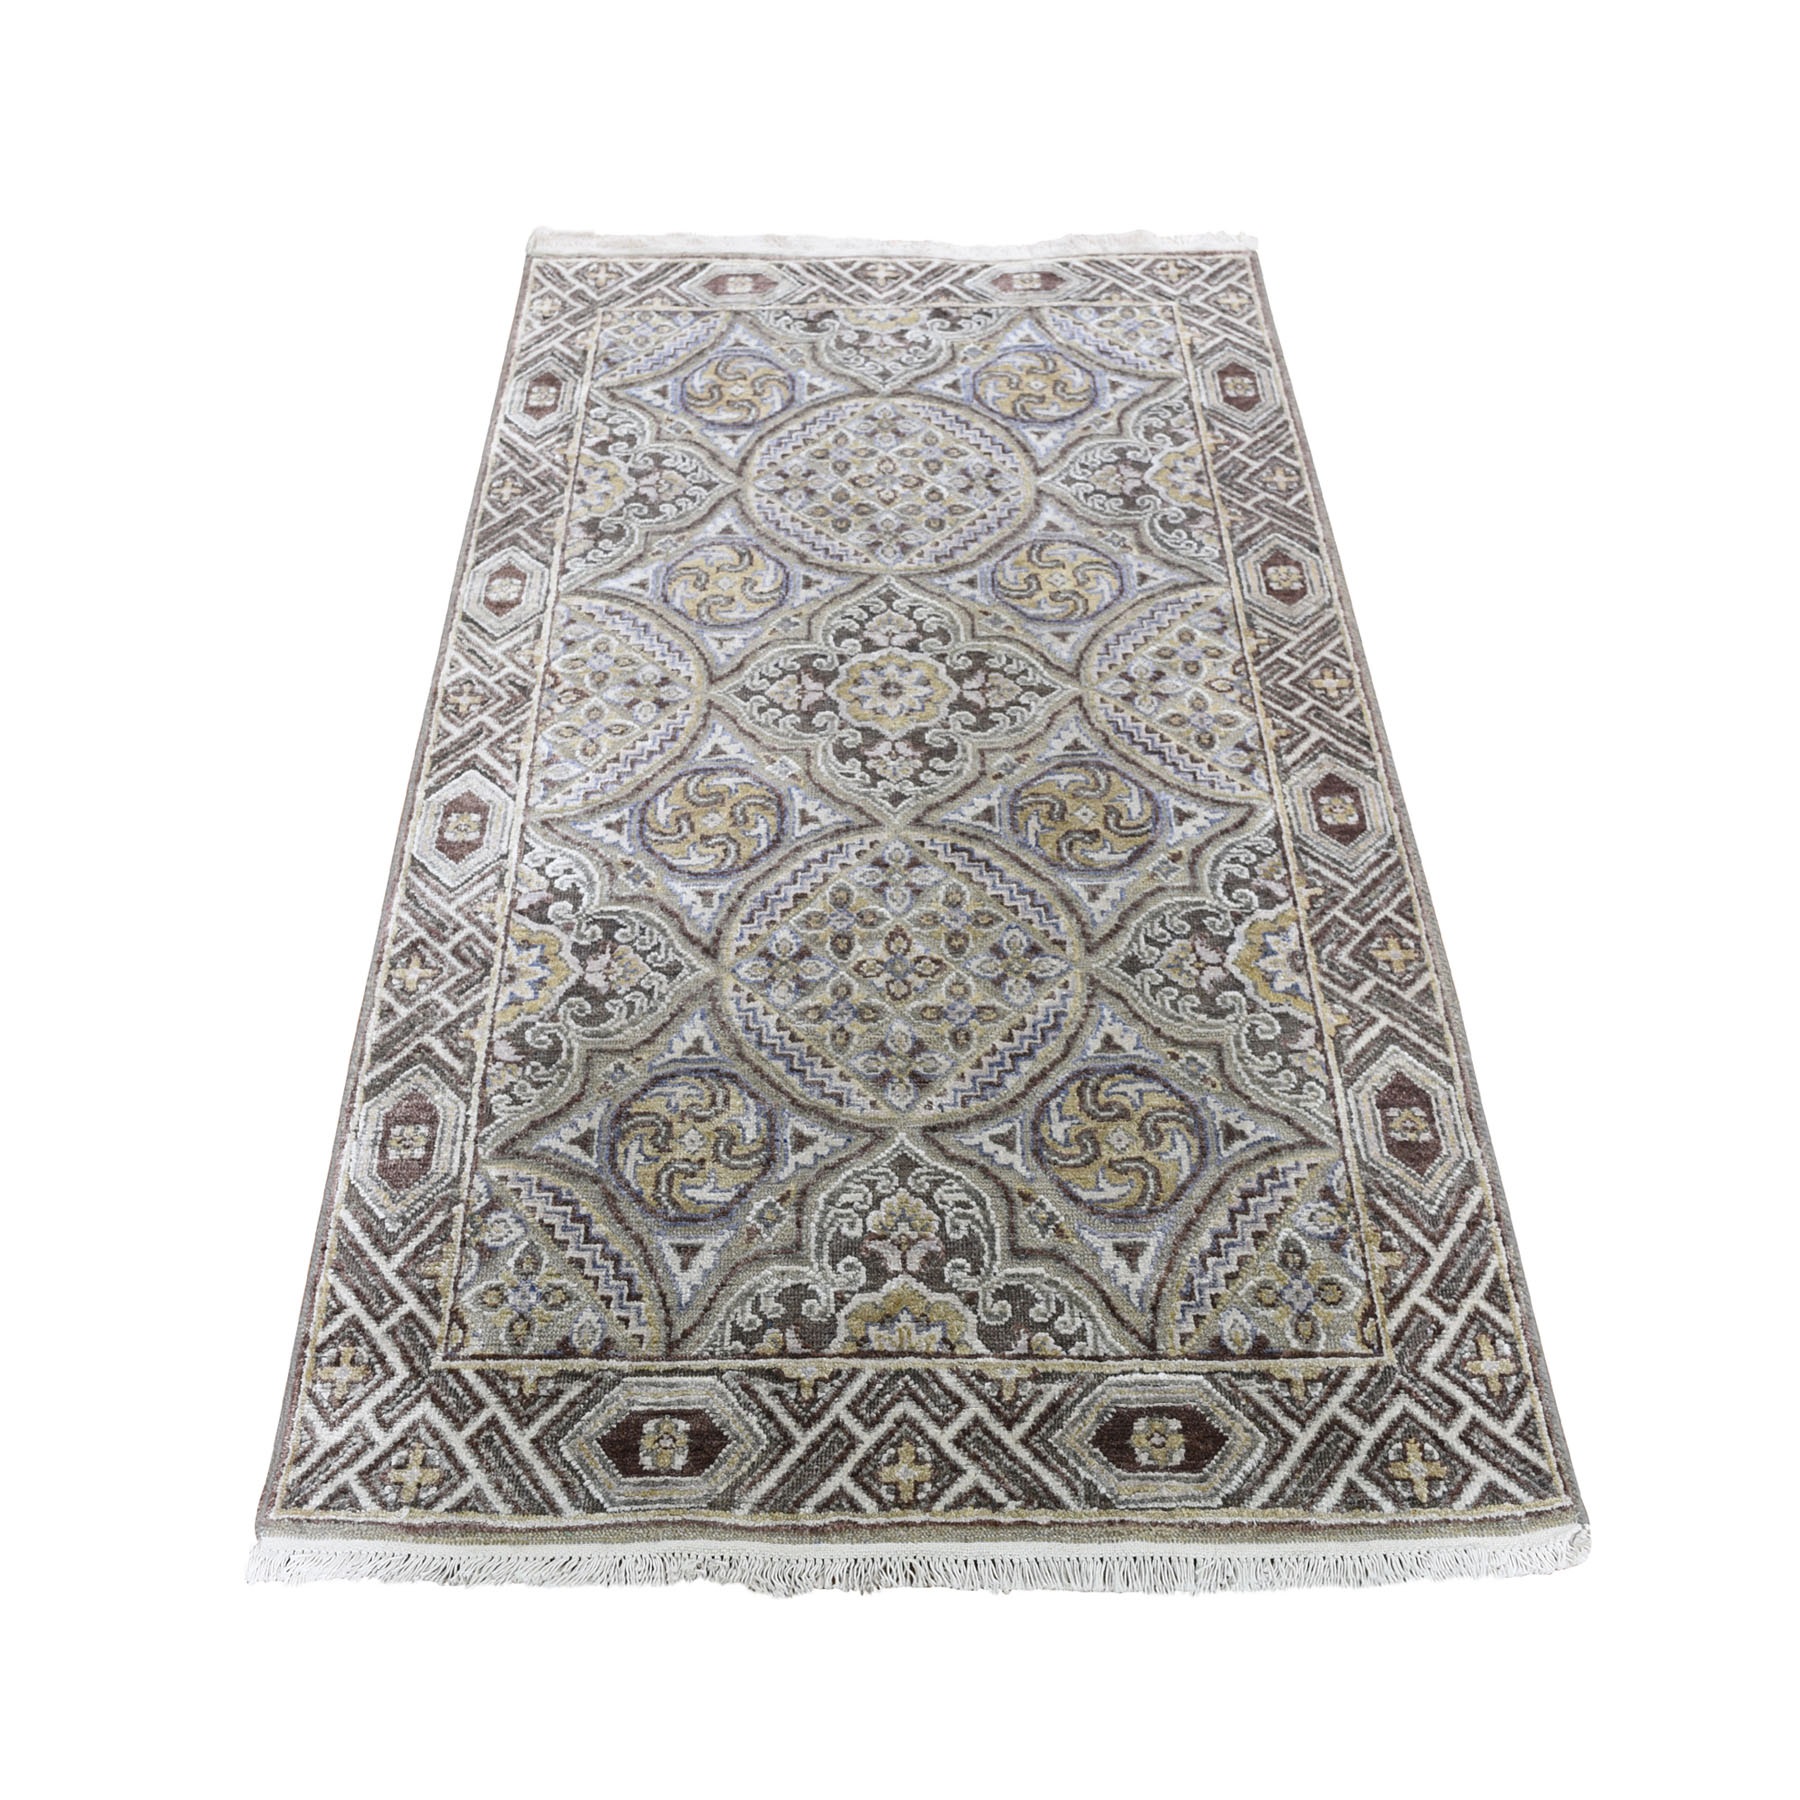 3'X5'2" Textured Wool And Silk Mughal Inspired Medallions Hand-Knotted Oriental Rug moad69dd